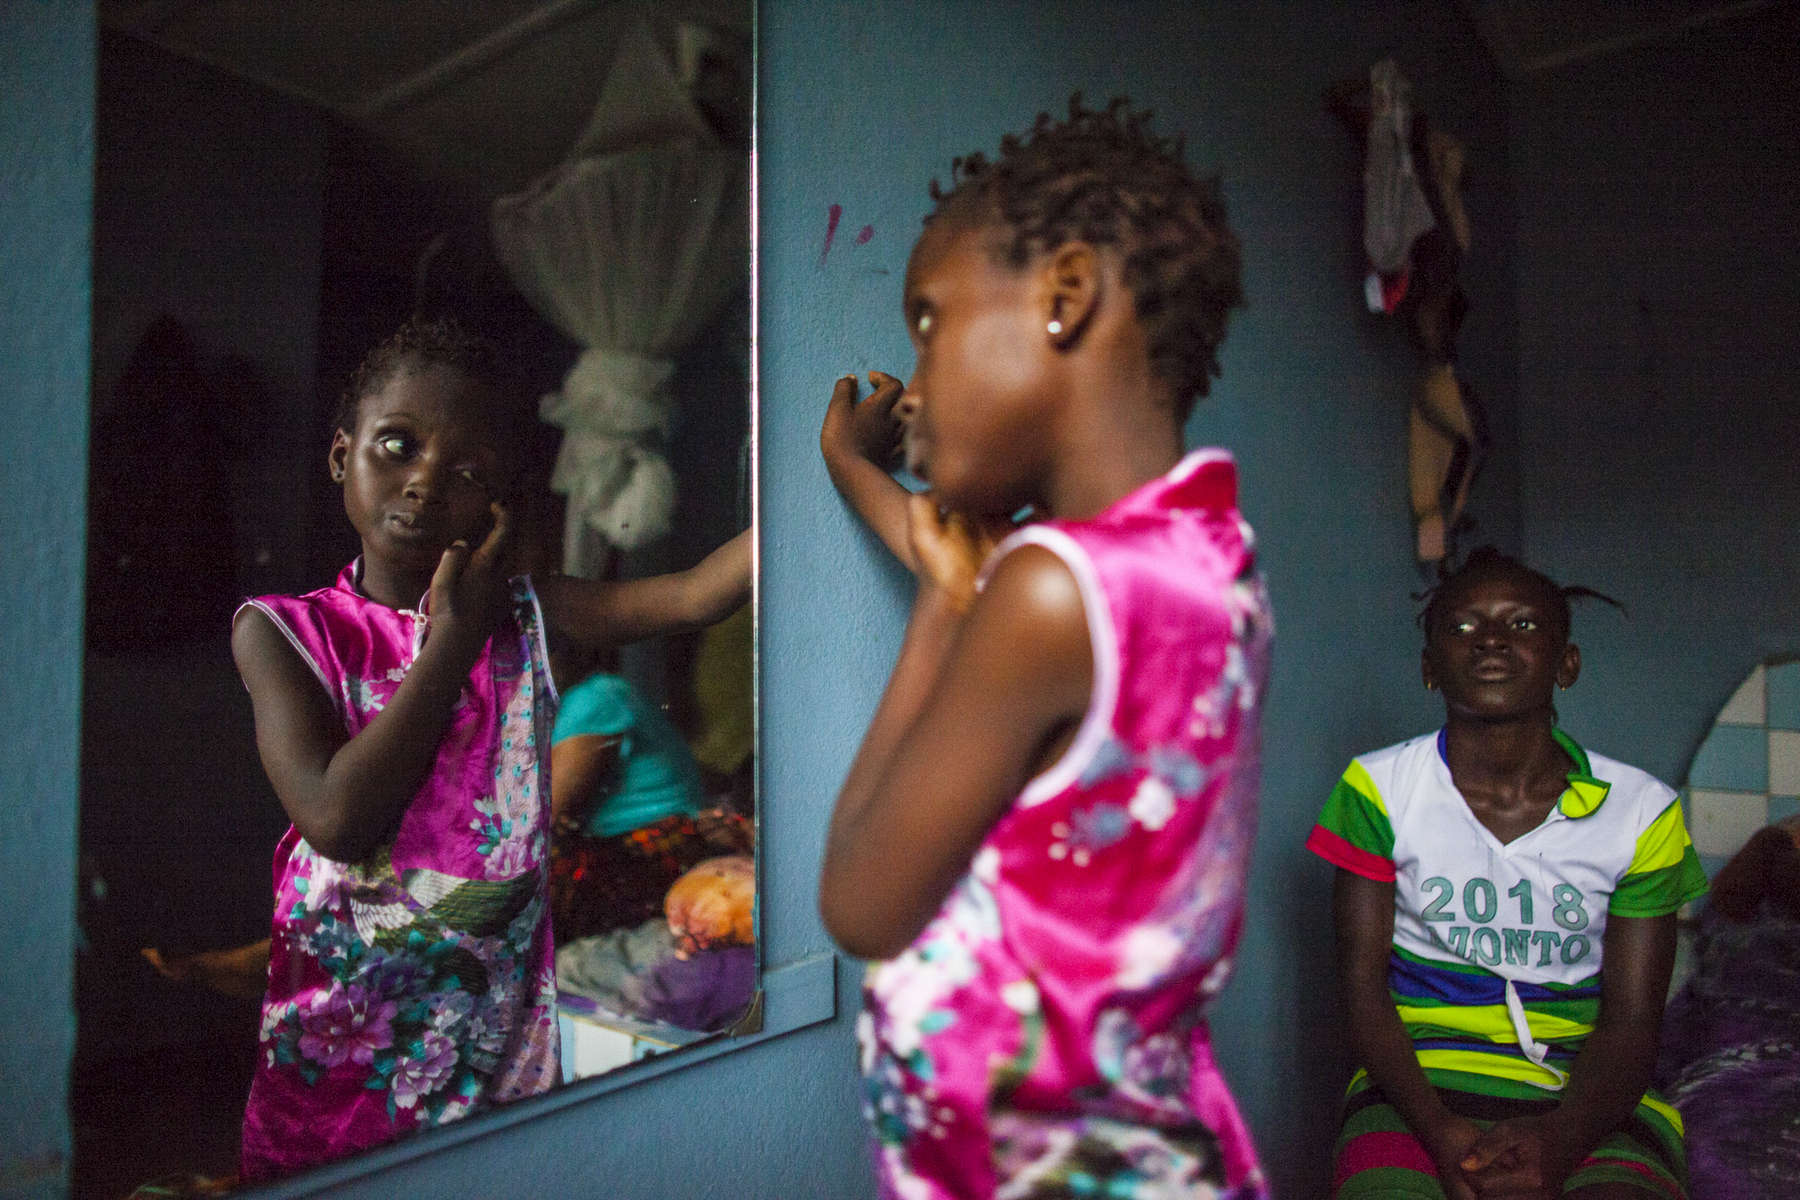 Ebola survivors Aminata Conteh, 8, looks in the mirror as Isatu Tholley, 12 looks on at their guesthouse in Freetown, Sierra Leone.